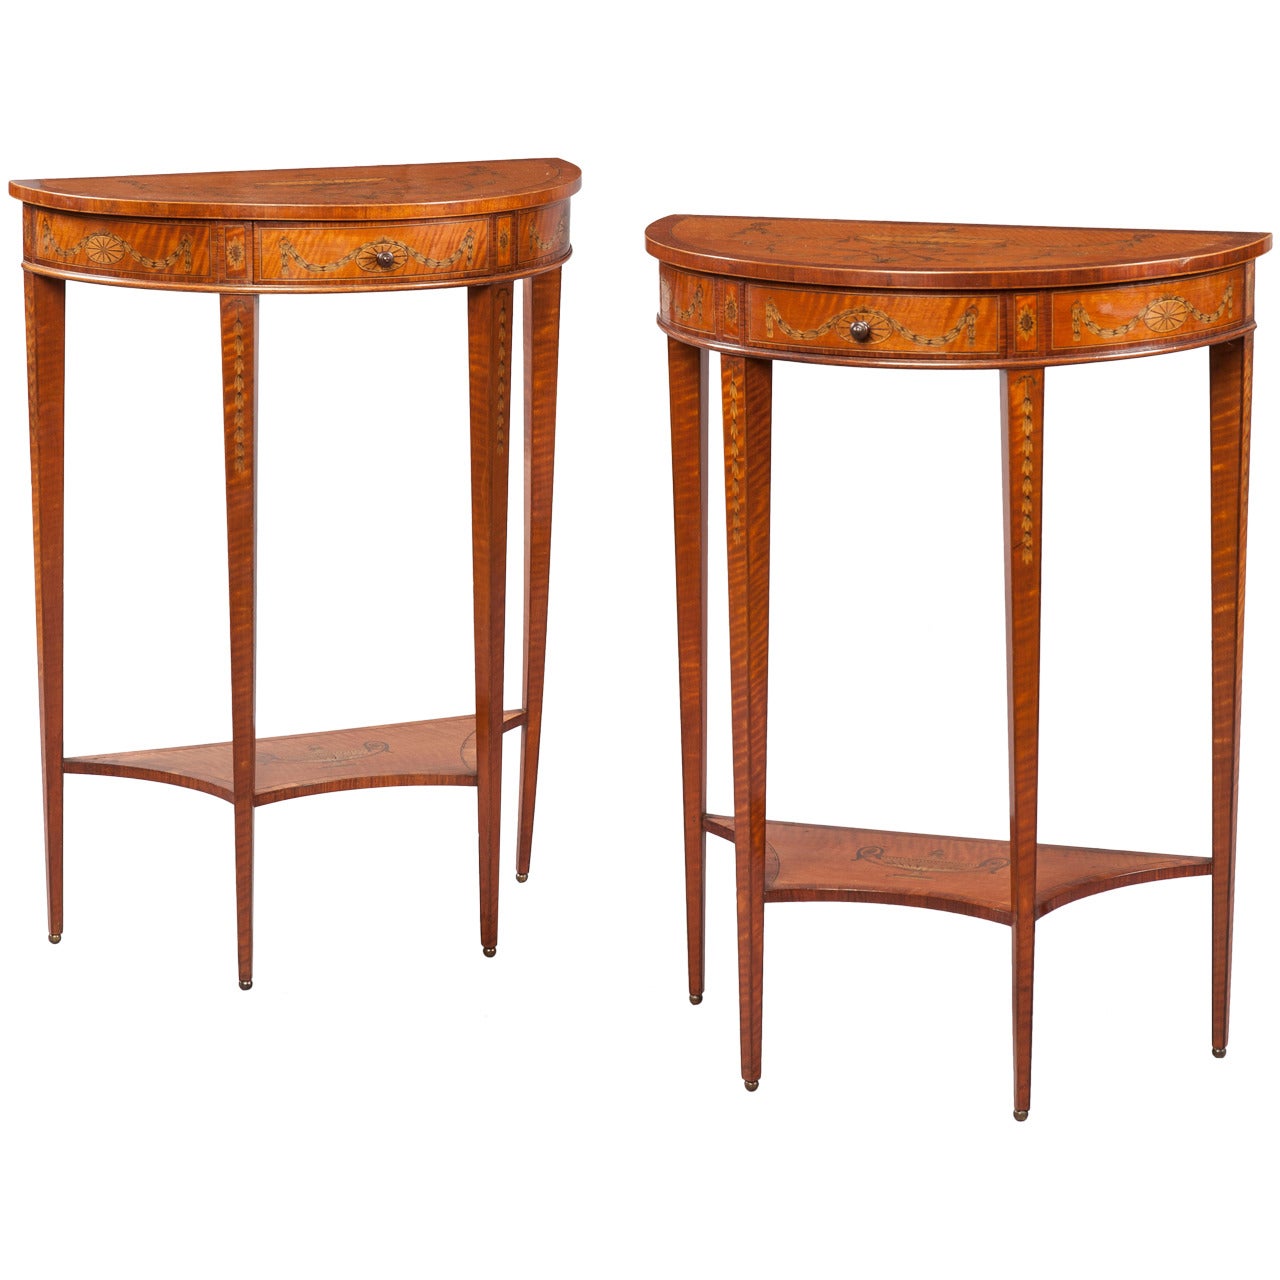 Pair of English Satinwood Console Tables in the Neoclassical Style